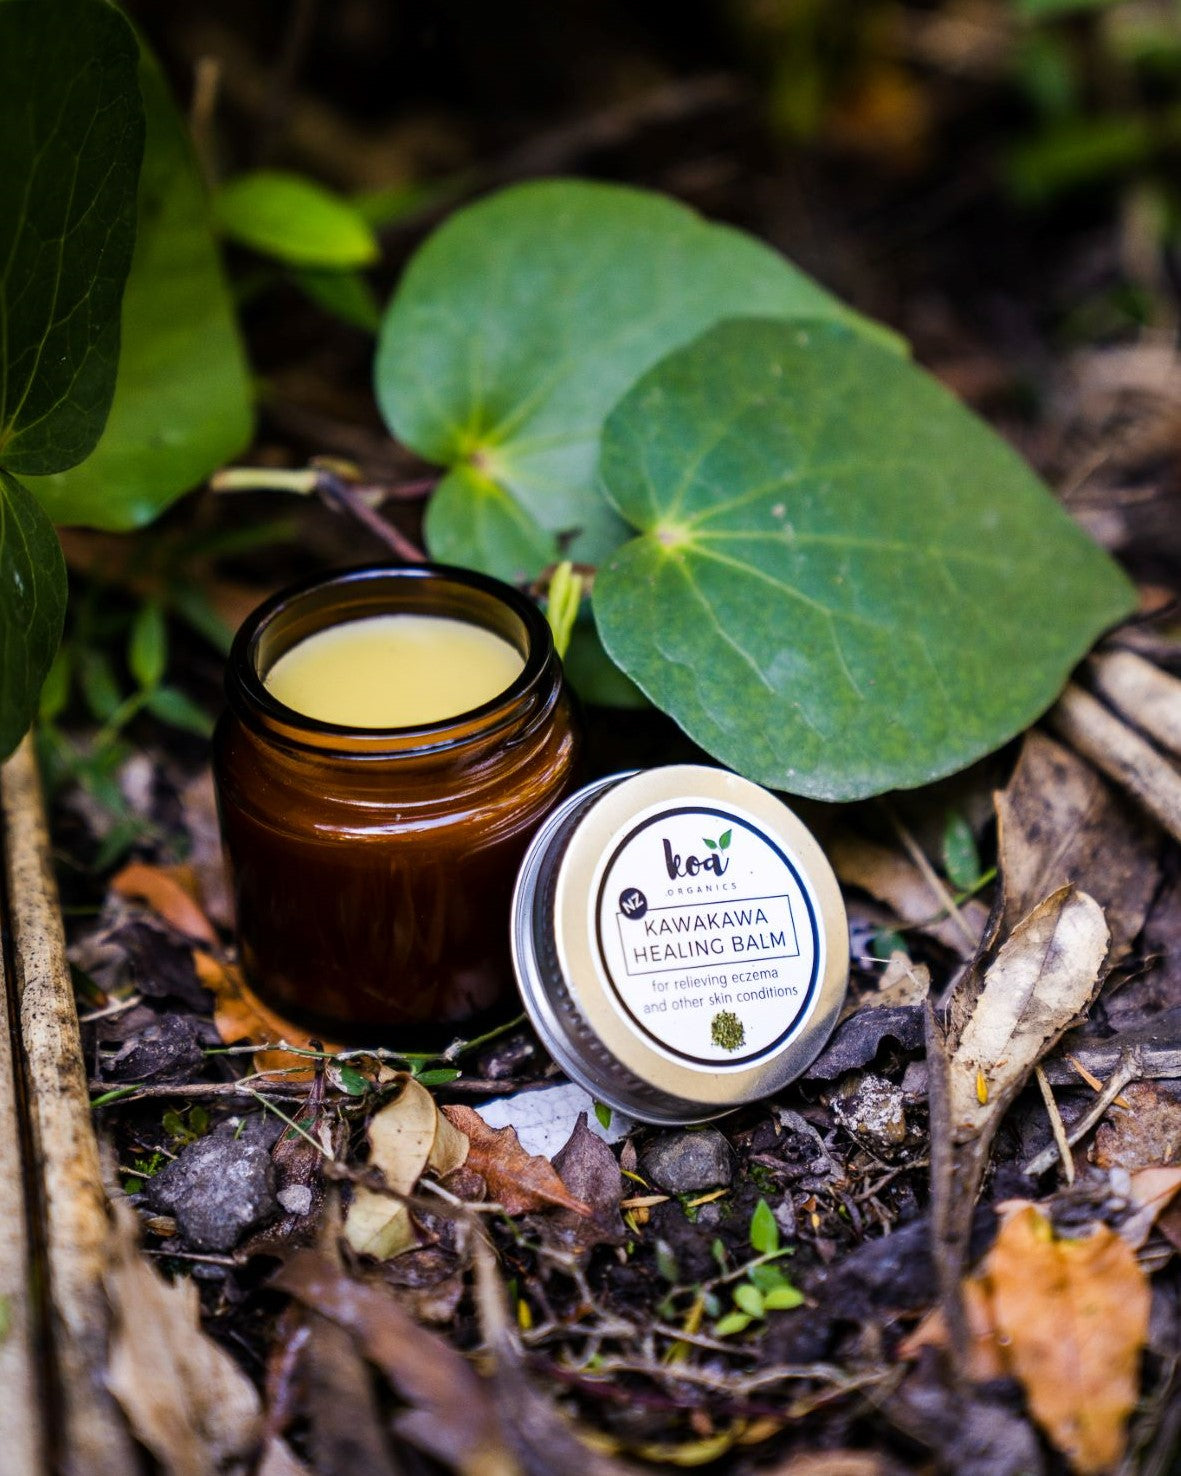 Nature knows best kawakawa healing balm from the forest